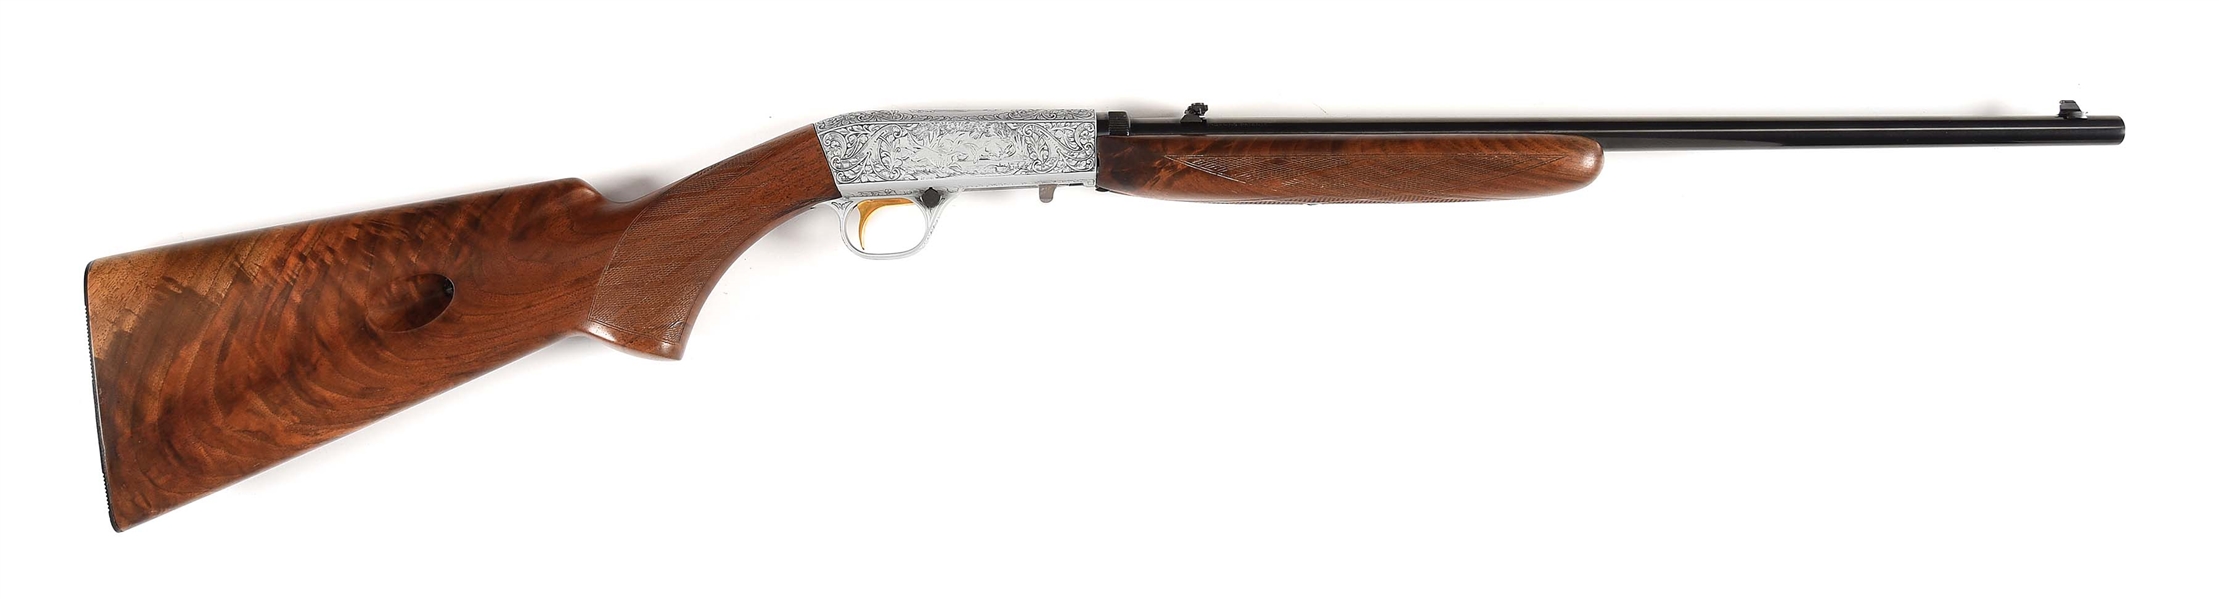 (C) OUTSTANDING BAERTEN ENGRAVED BROWNING SA-22 GRADE III SEMI-AUTOMATIC RIFLE WITH CASE.